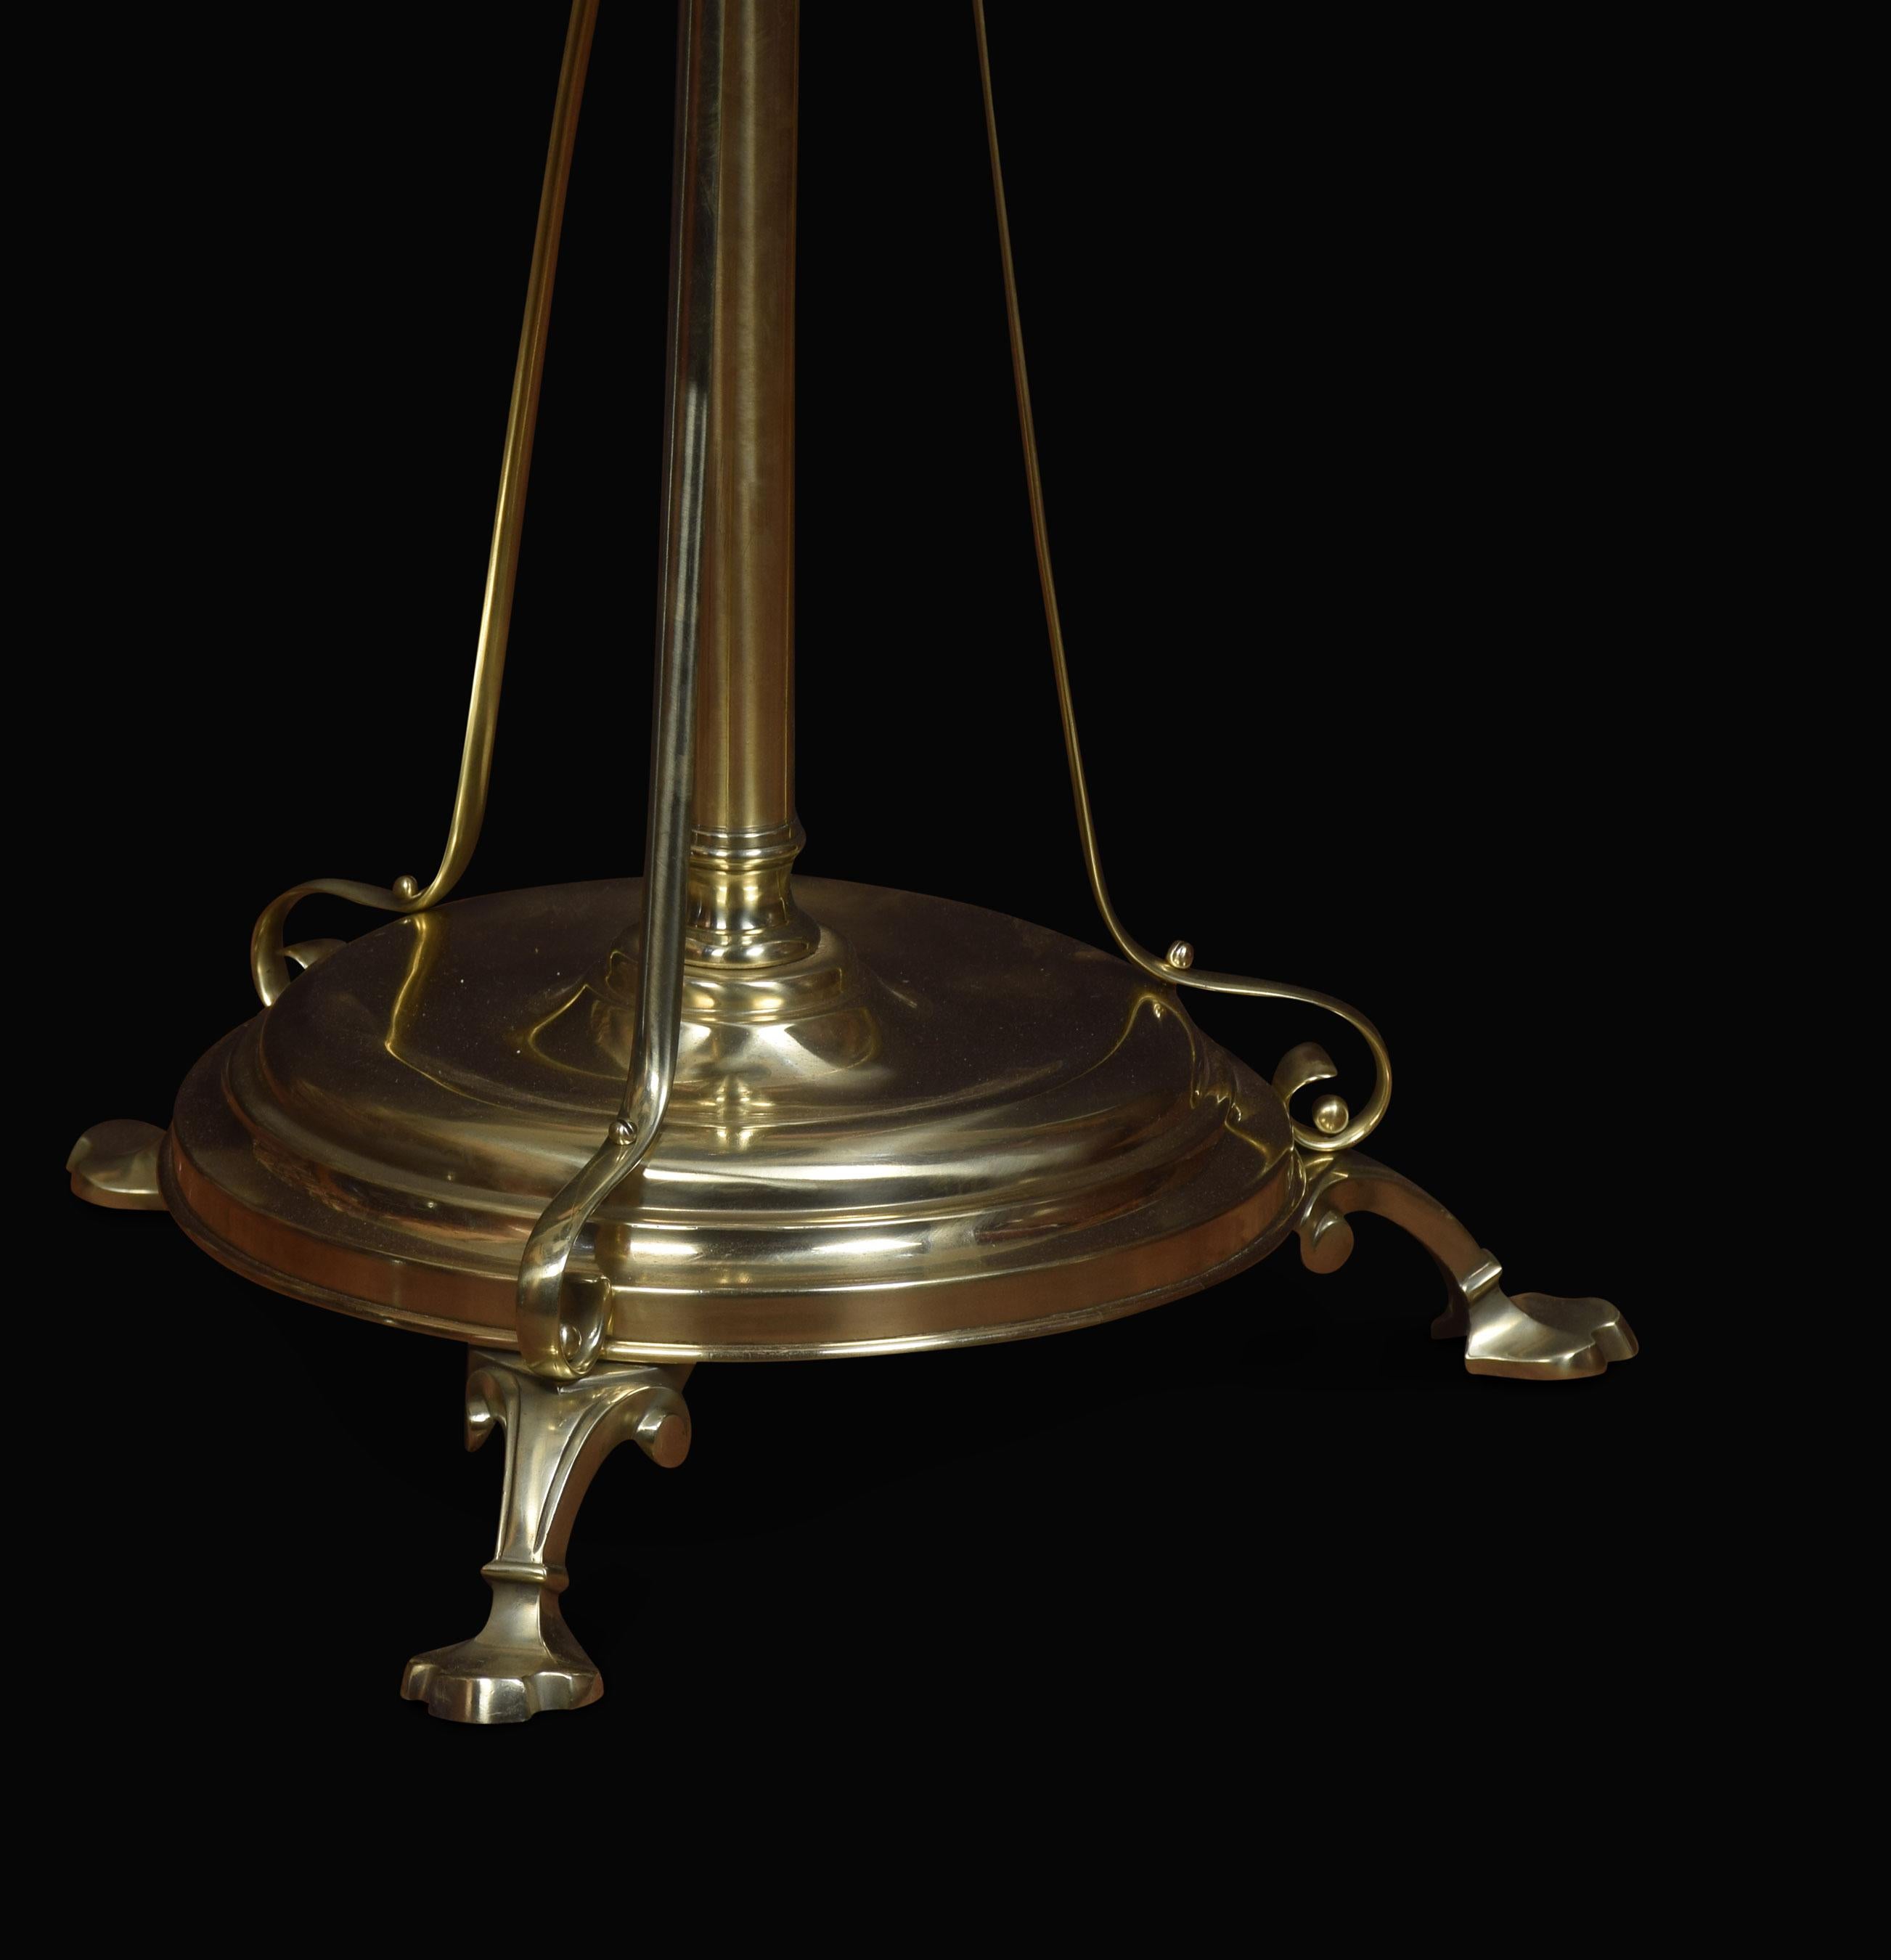 Art Nouveau brass and marble standard lamp, having turned central column, to the circular vined marble shelf. All raised up on three splayed supports terminating in pad feet. The lamp has been rewired and tested.
Dimensions:
Height 55 inches